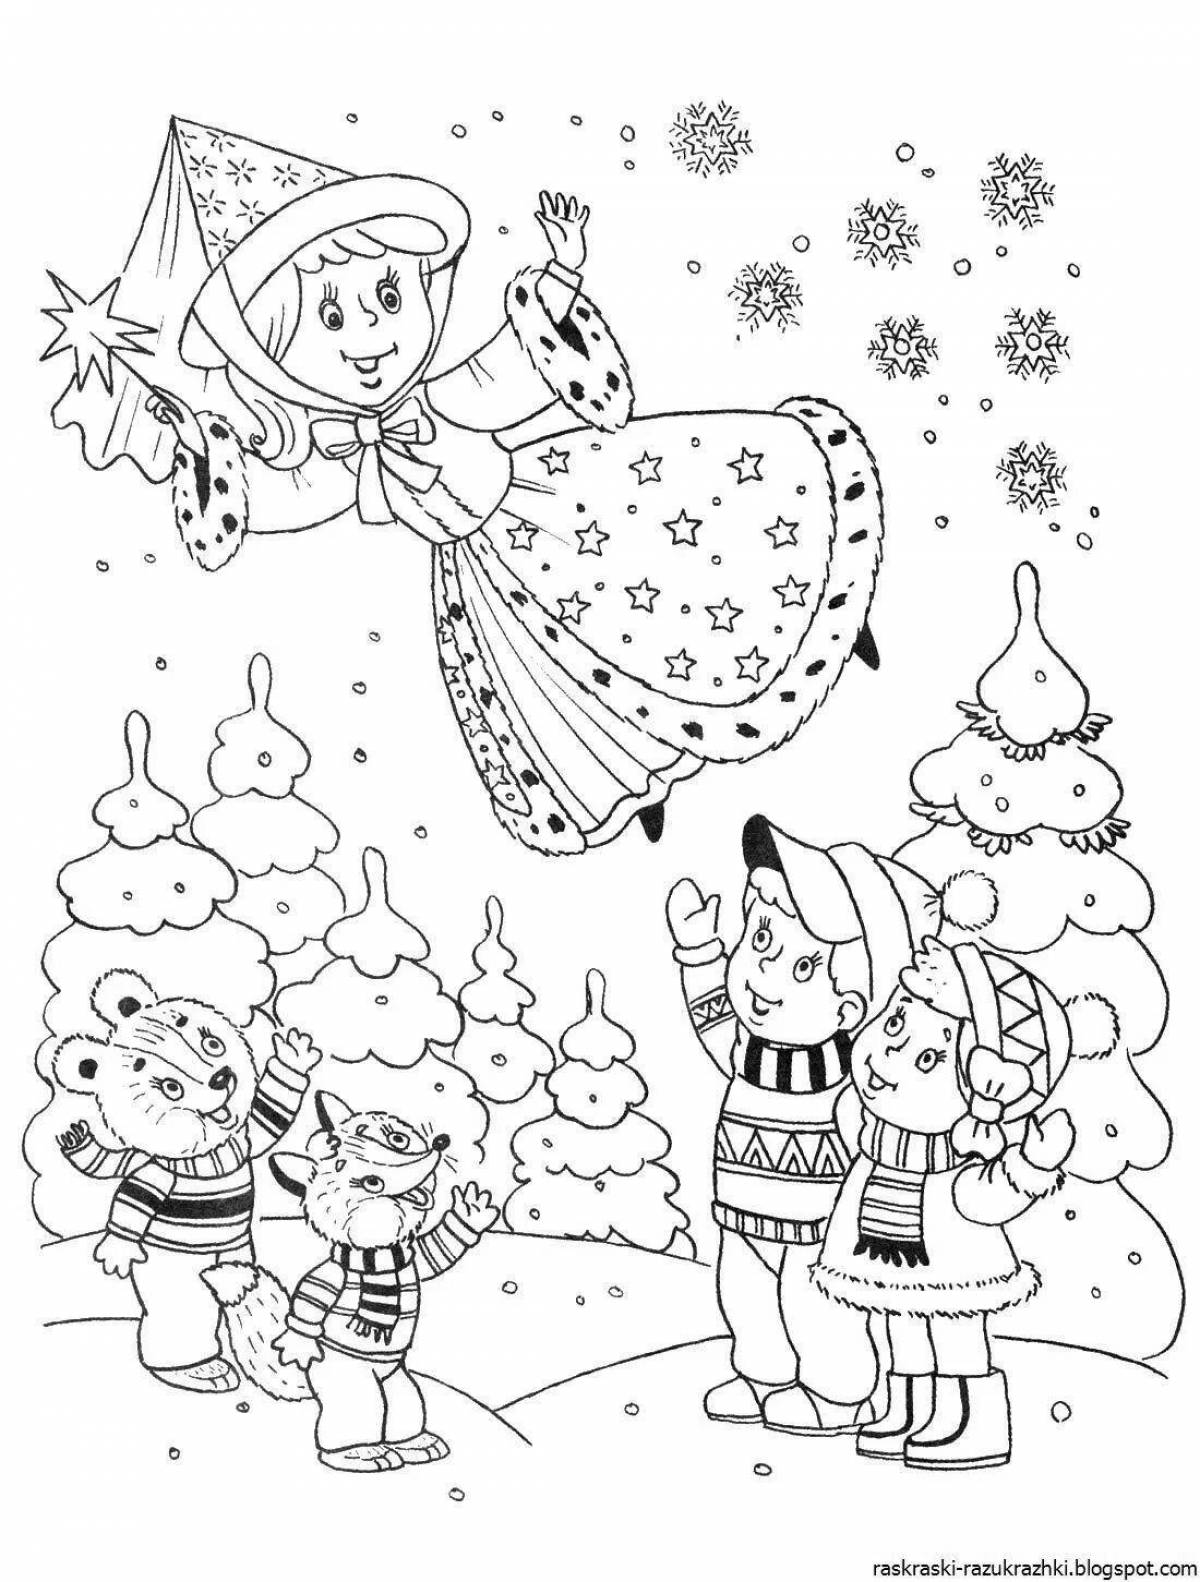 Merry winter coloring book for children 6-7 years old